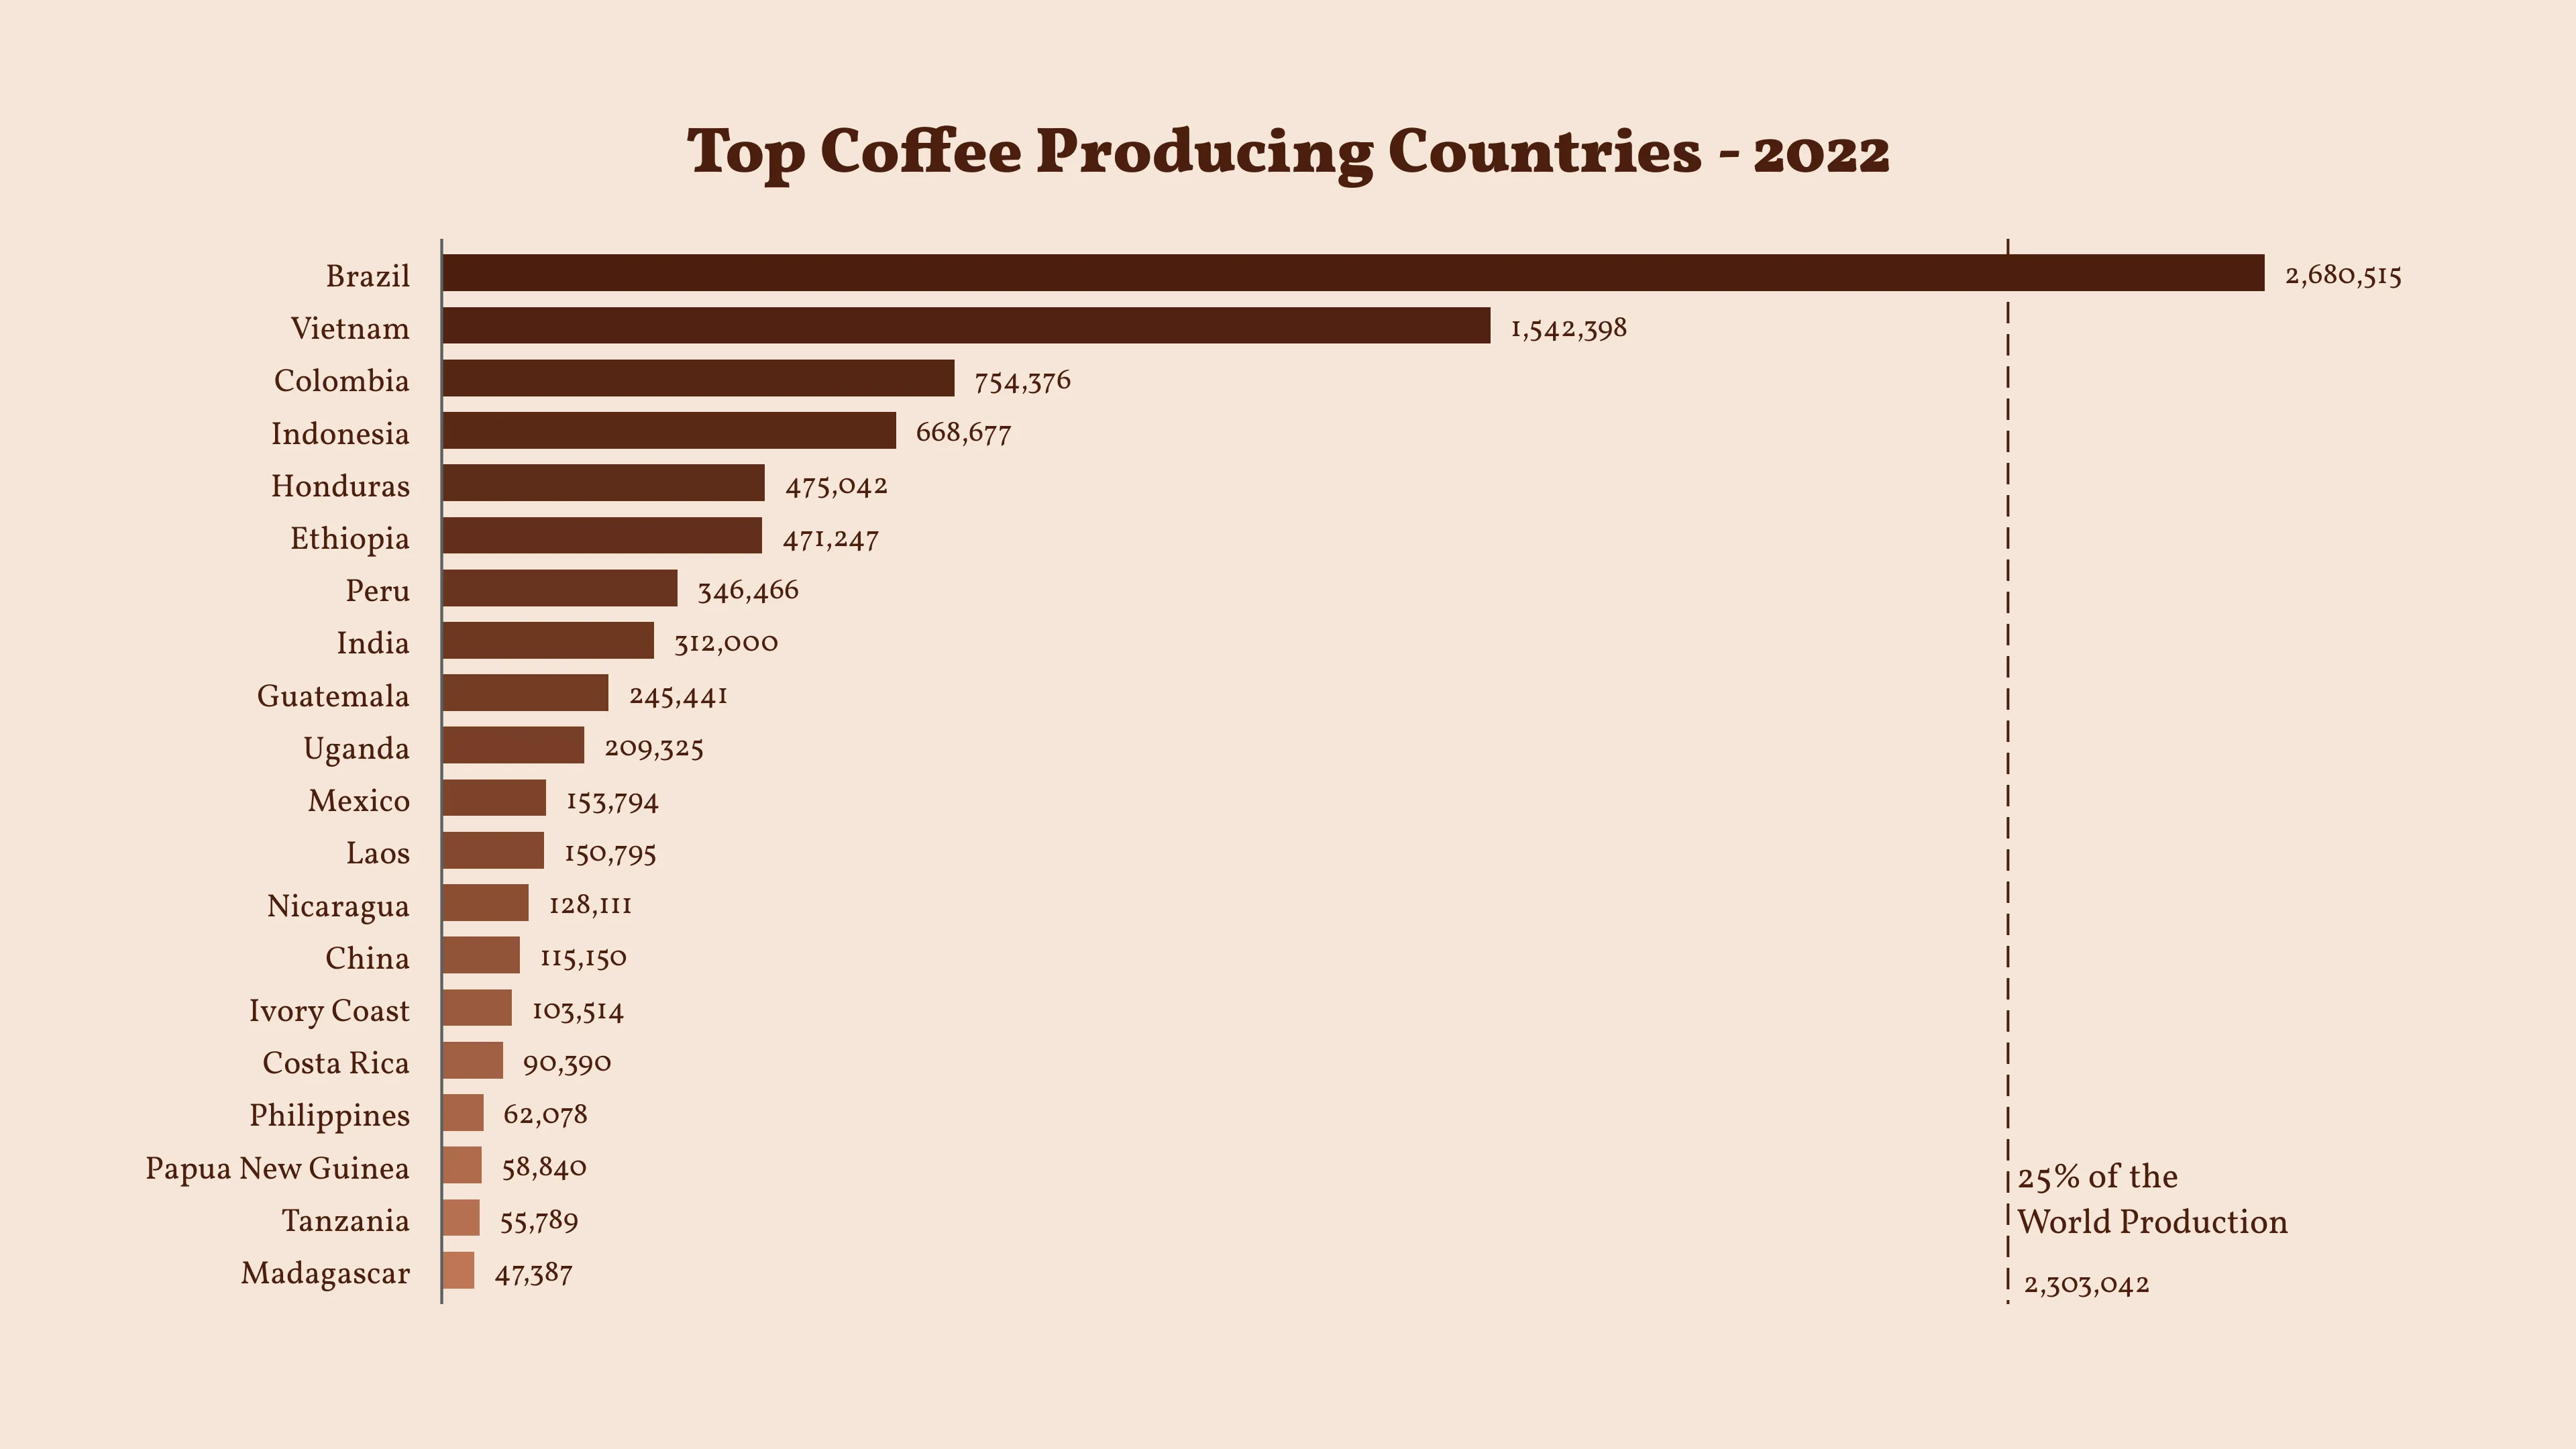 Top Coffee Producing Countries - 2022